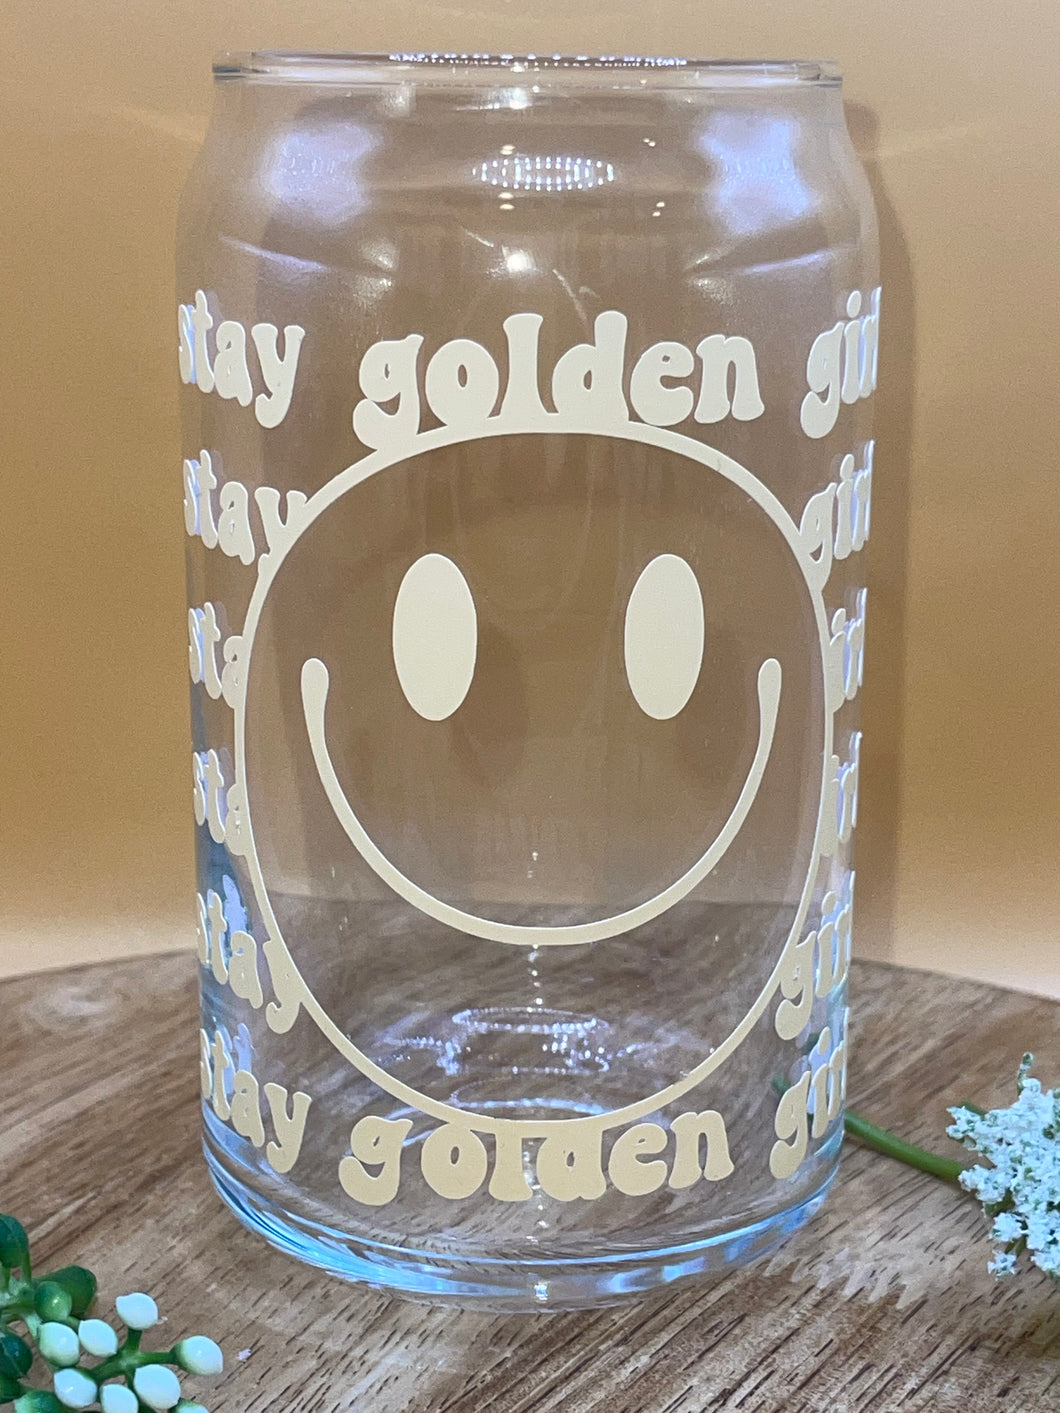 Stay Golden Girl GLOW IN THE DARK Cup